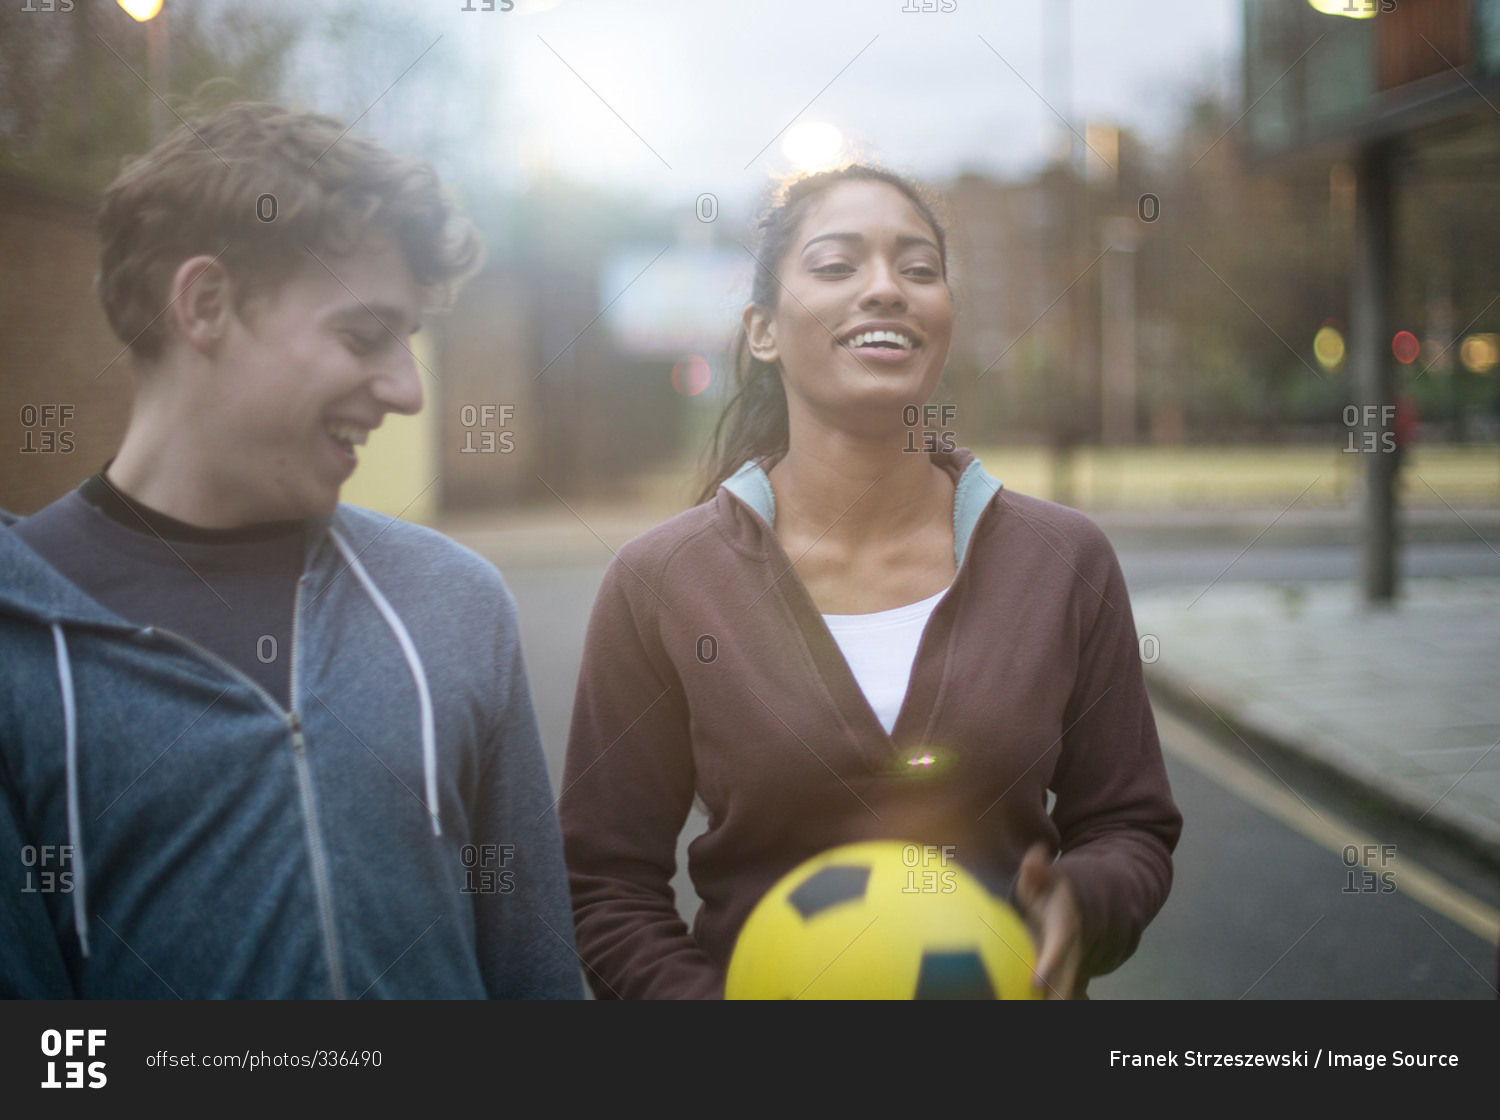 Young man and woman walking in street, holding soccer